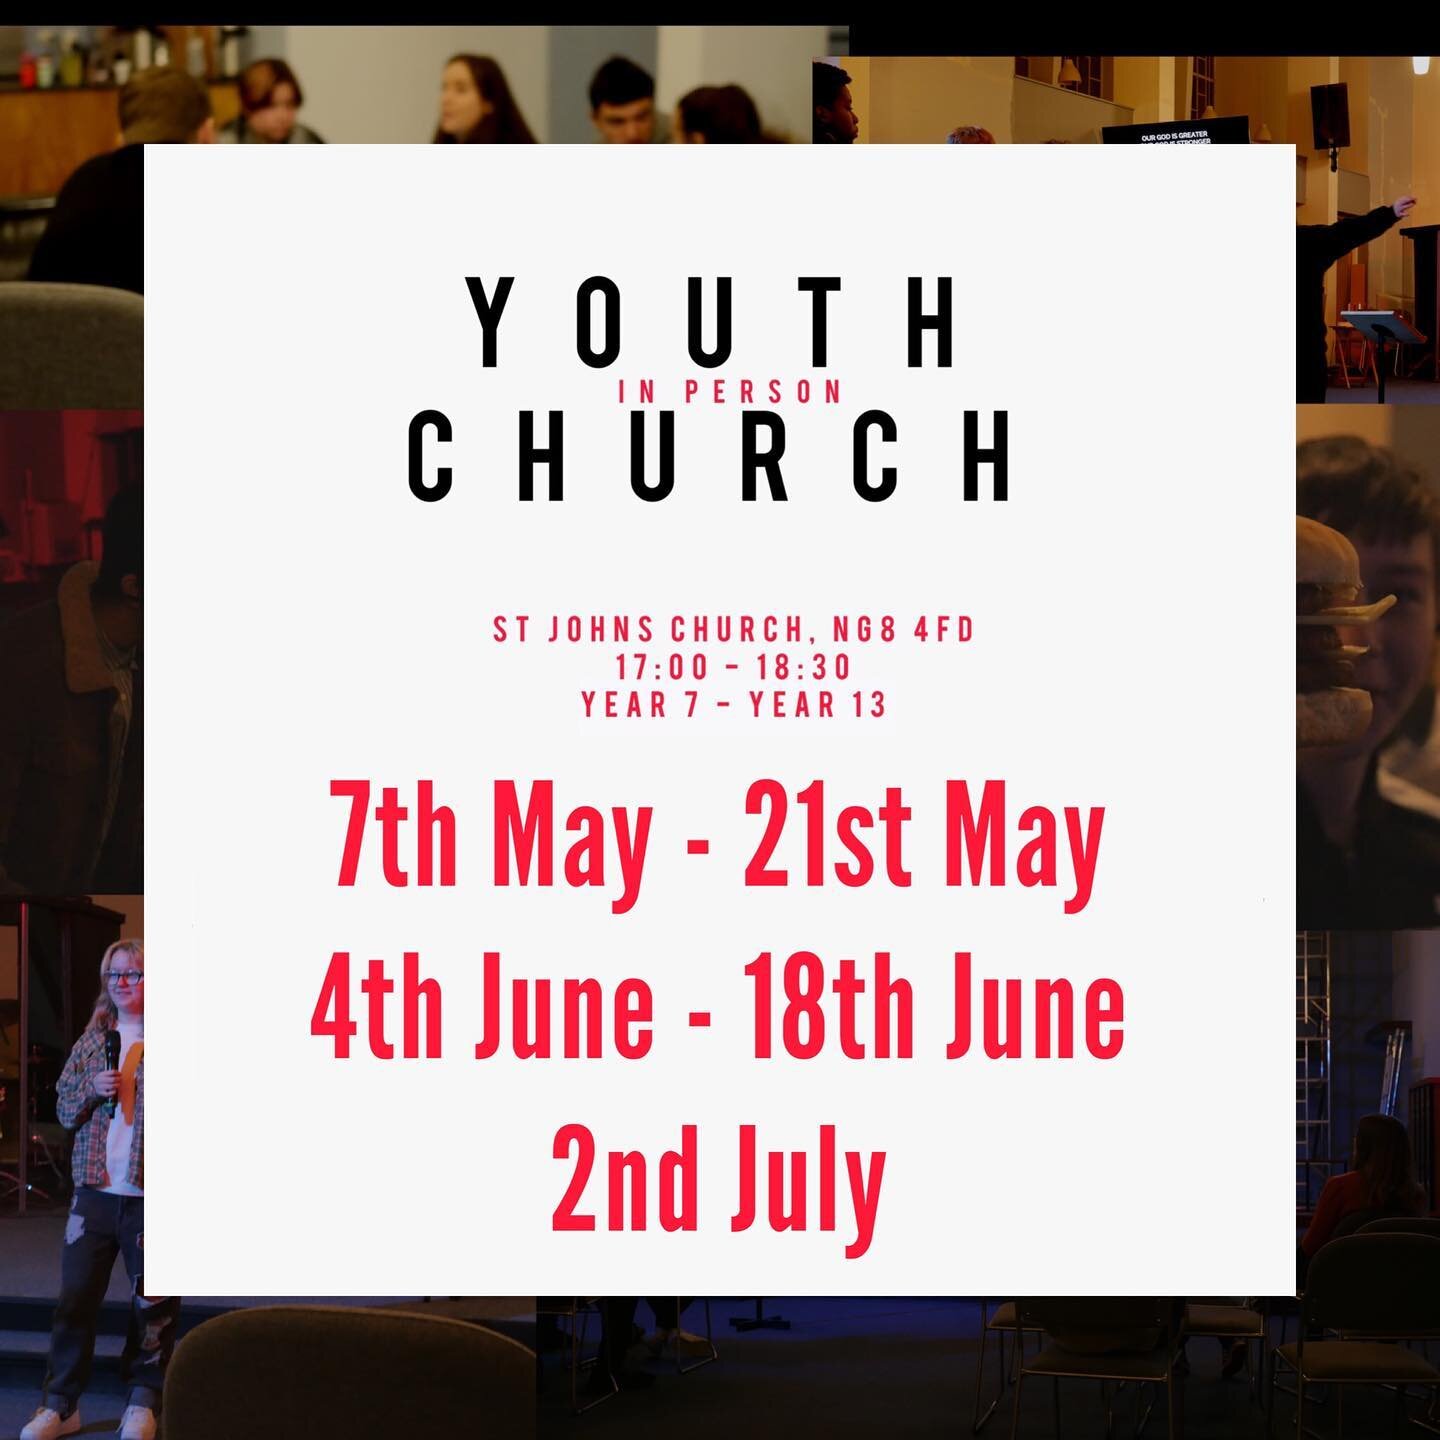 YOUTH CHURCH TERM DATES!
Mini bus pick up info on the next slide! We are really excited to gather together this term and unpack the book of Genesis together.